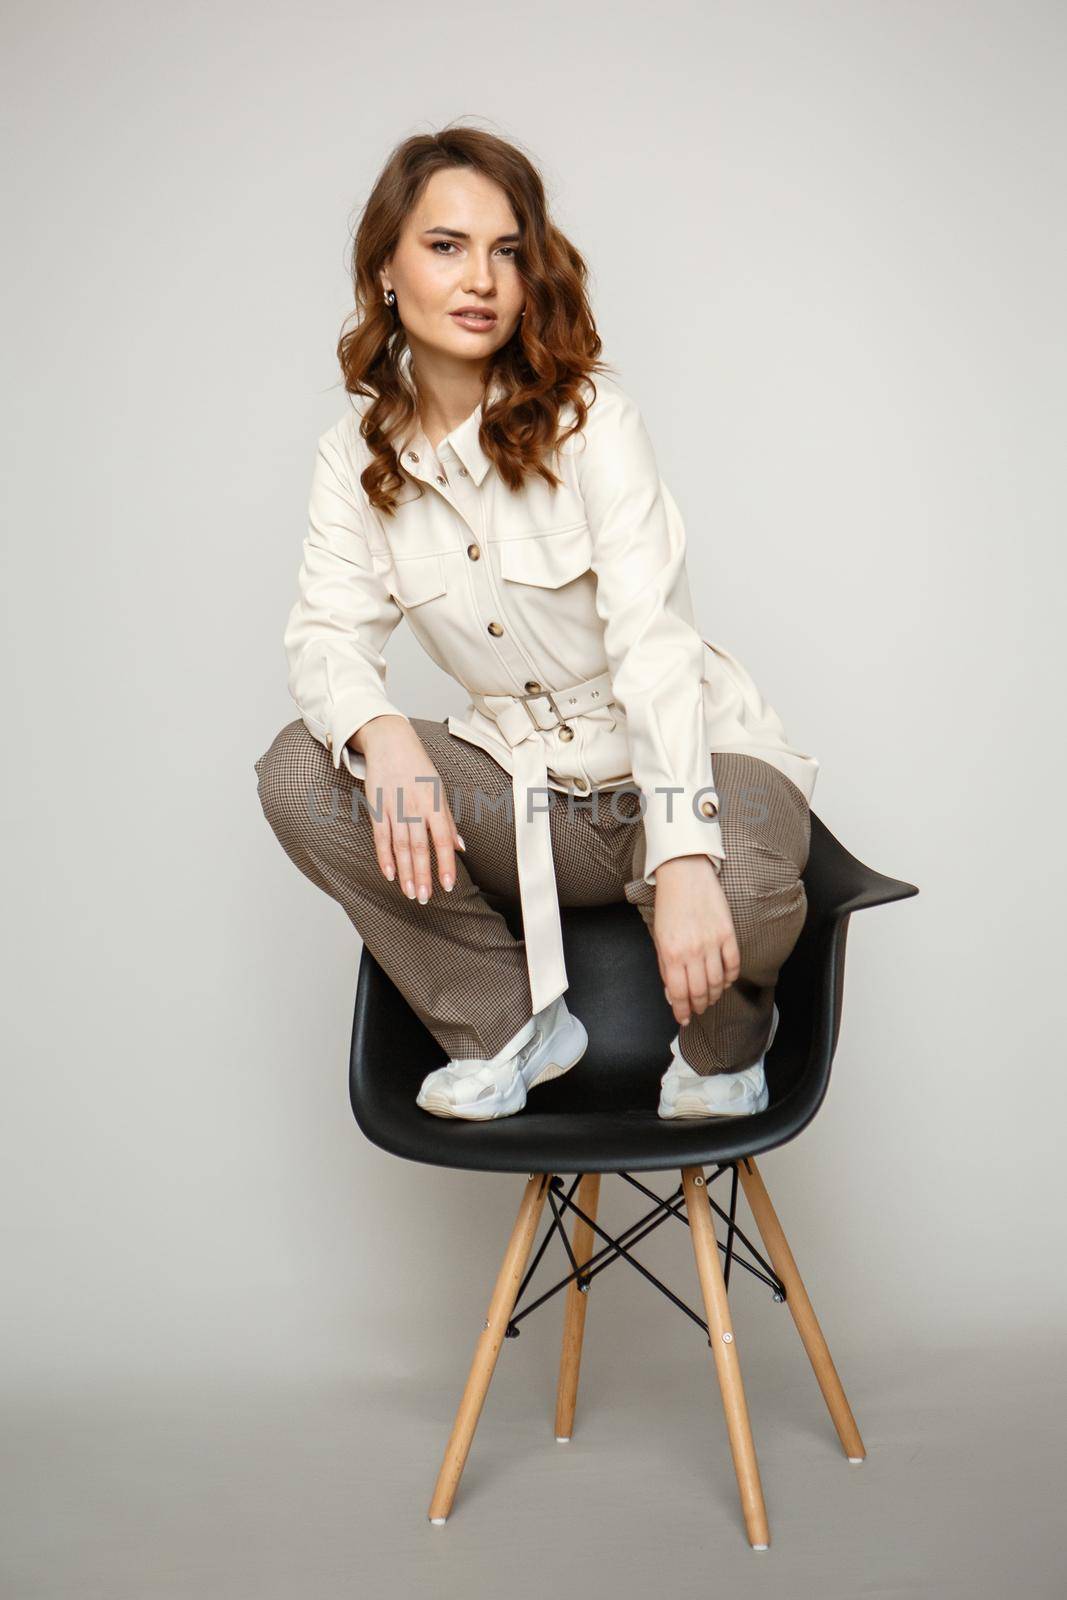 A model in a brown dress suit on a studio background. The girl next to the chair.